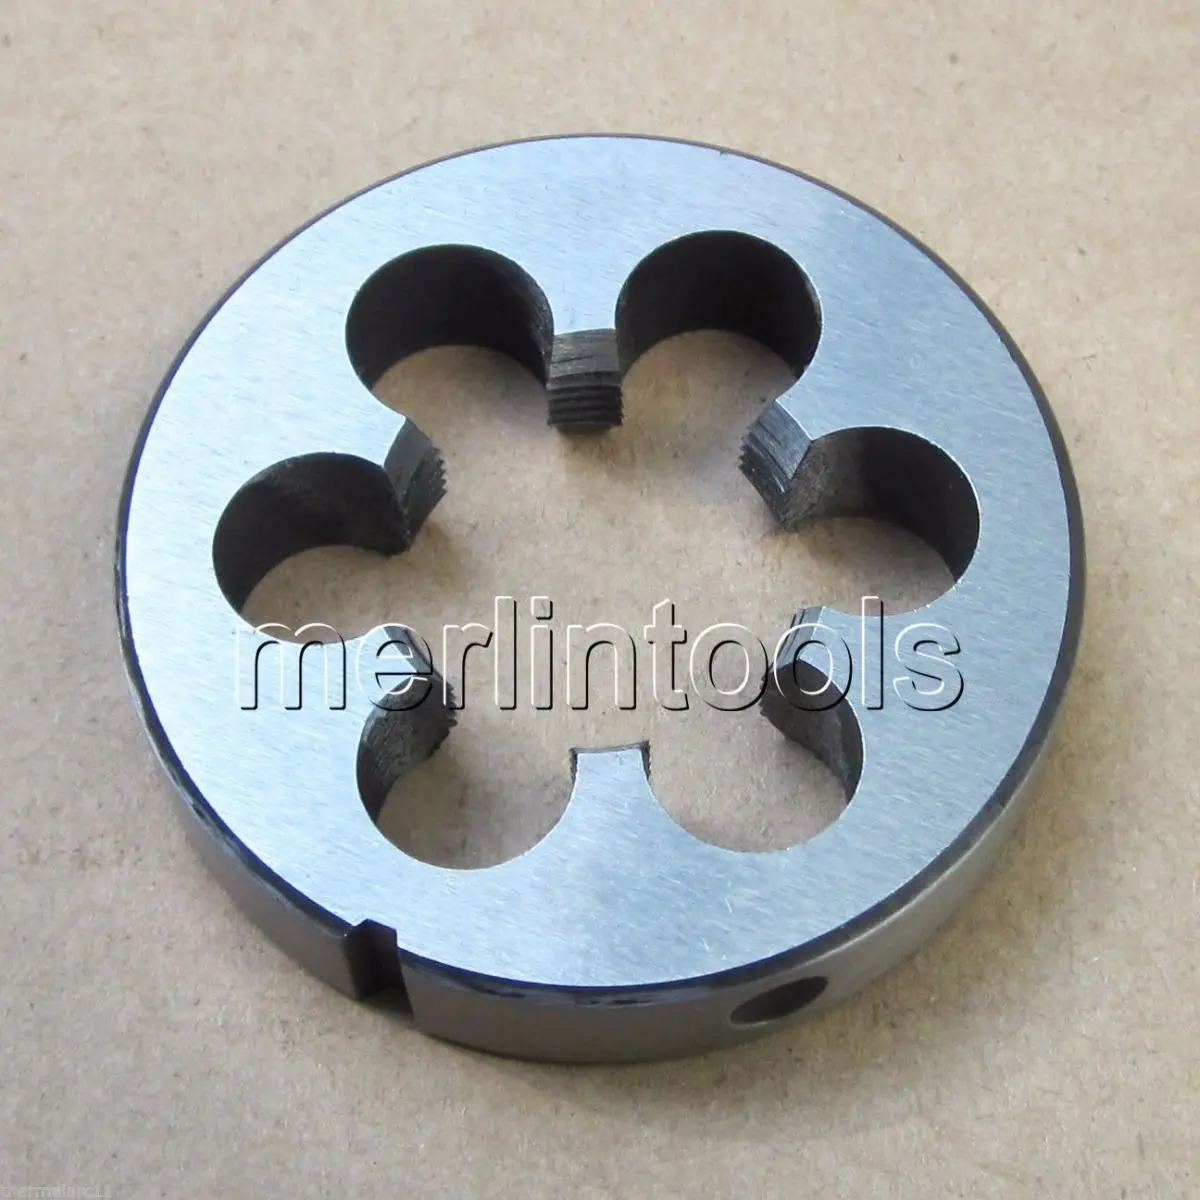 

26mm x 3 Metric Right hand Die M26 x 3.0mm Pitch